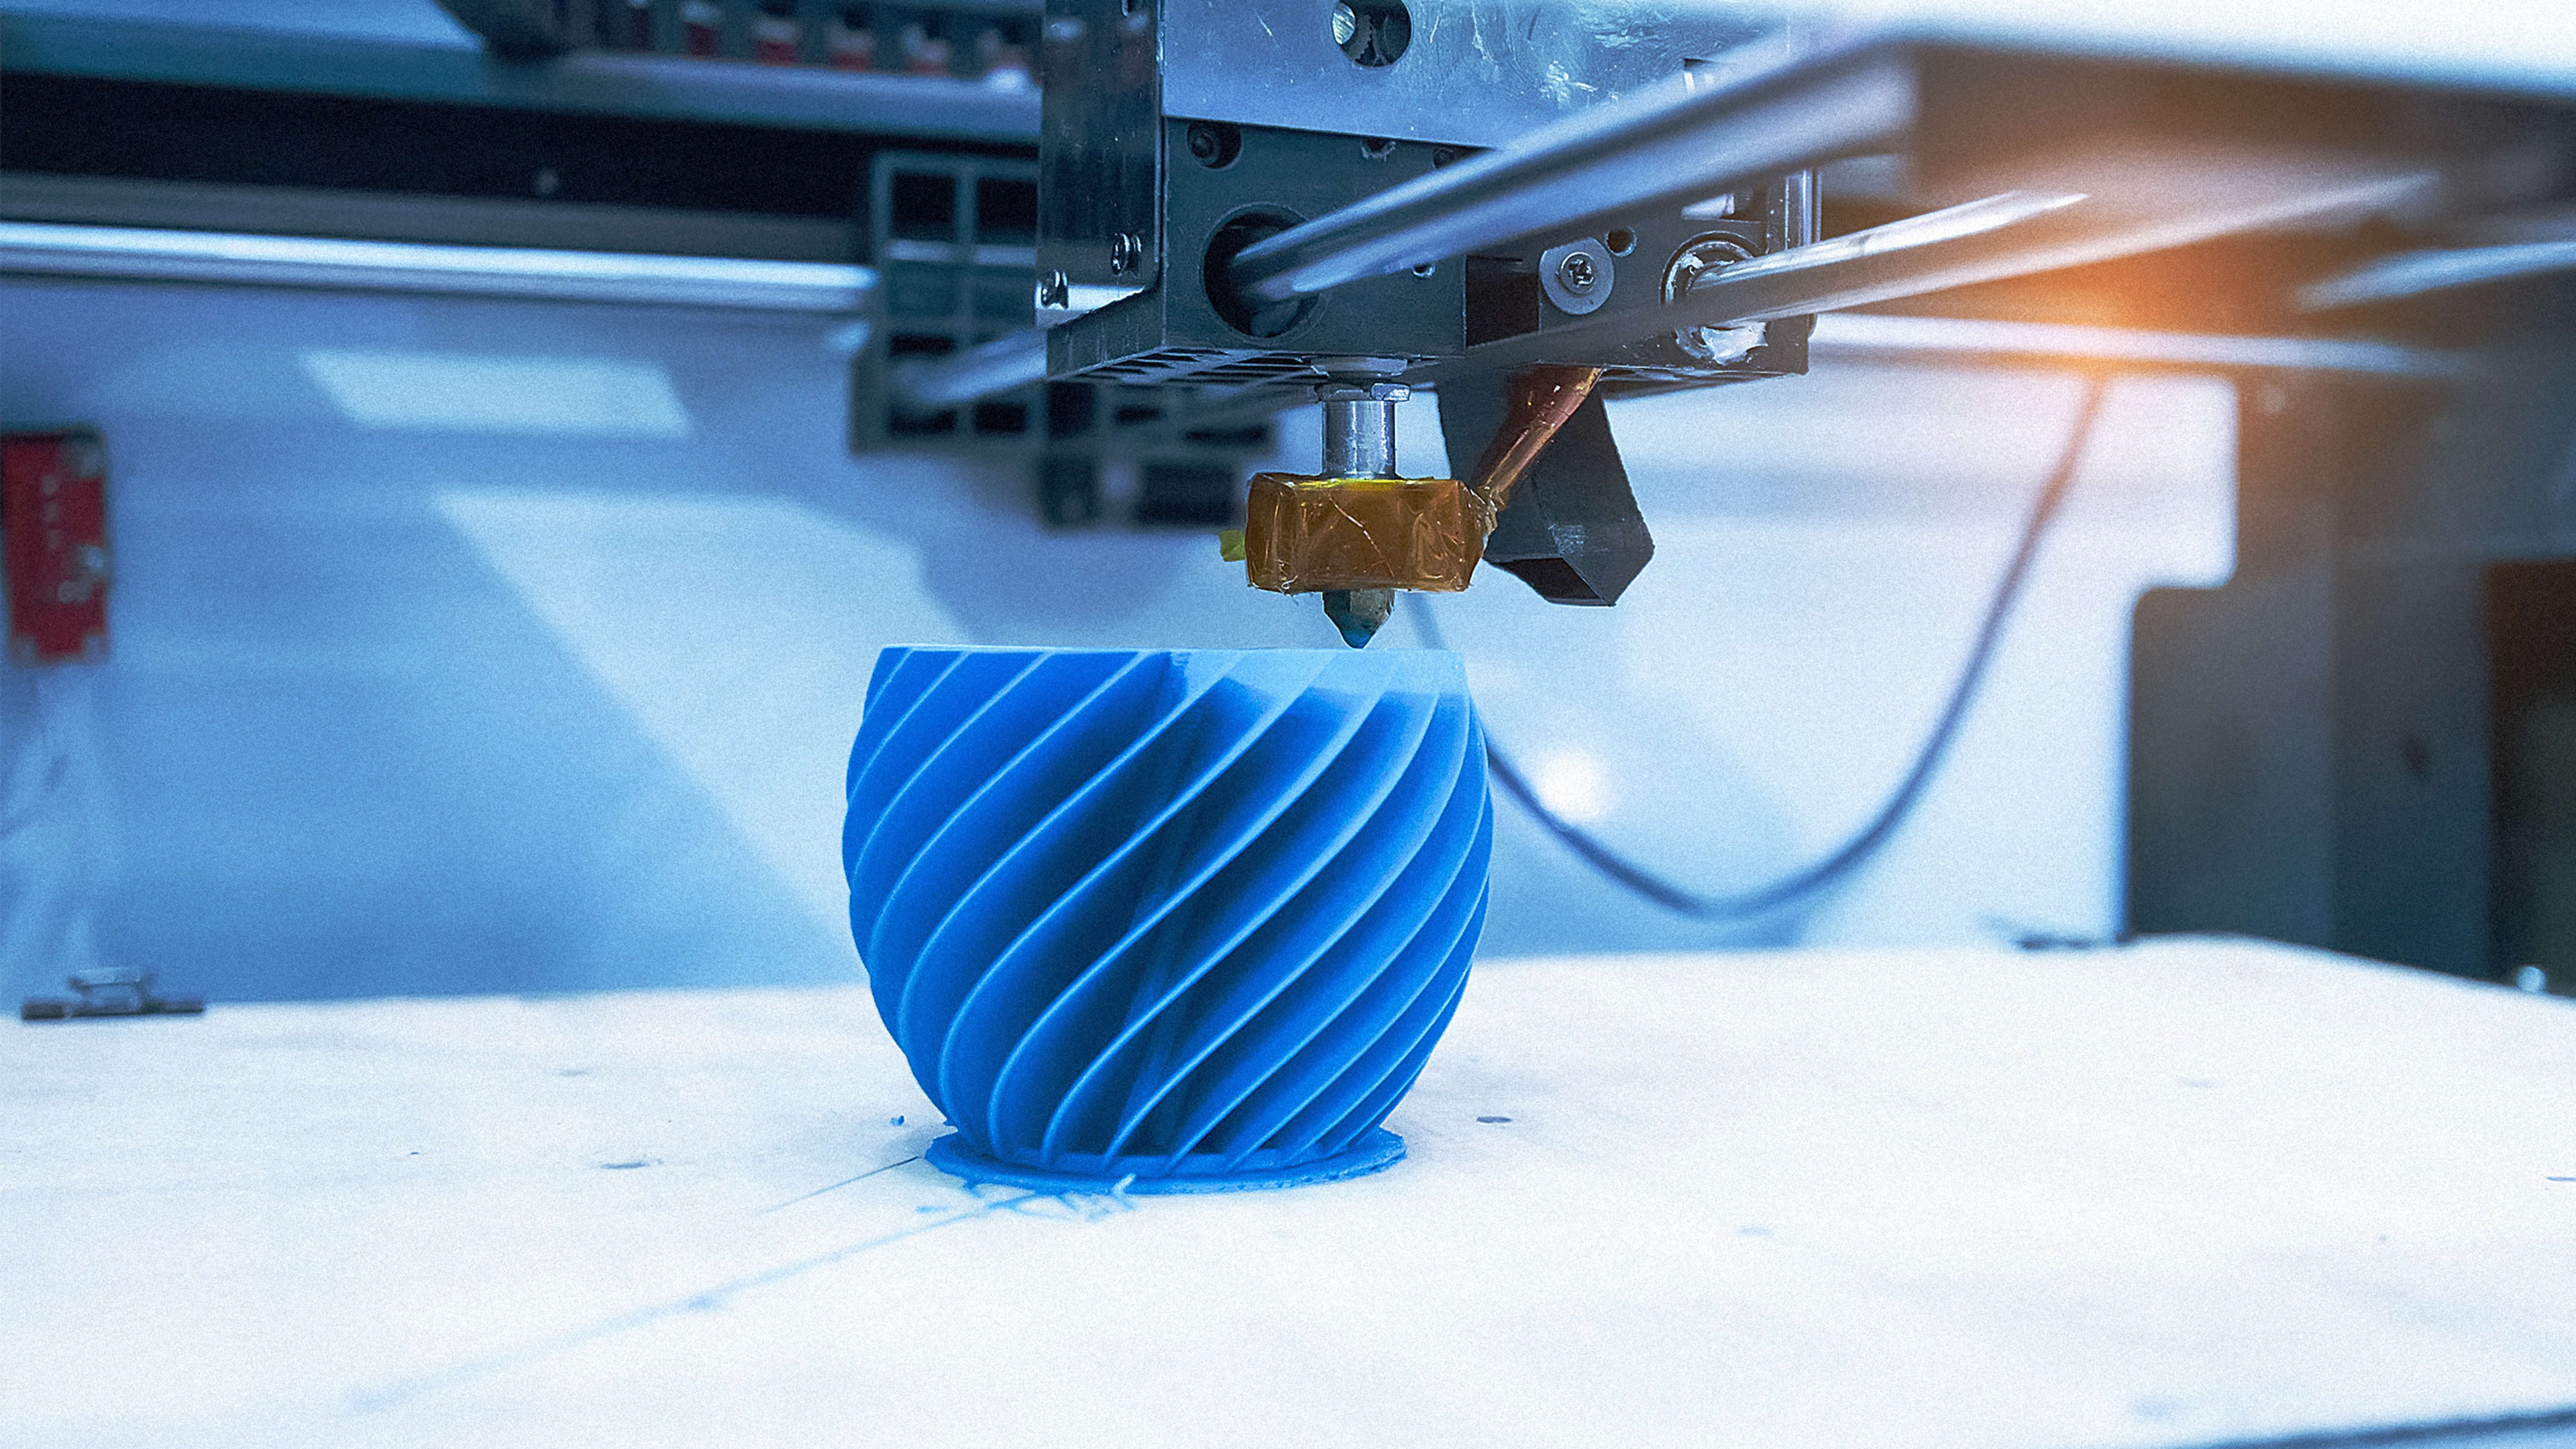 The 3D printing revolution is finally here